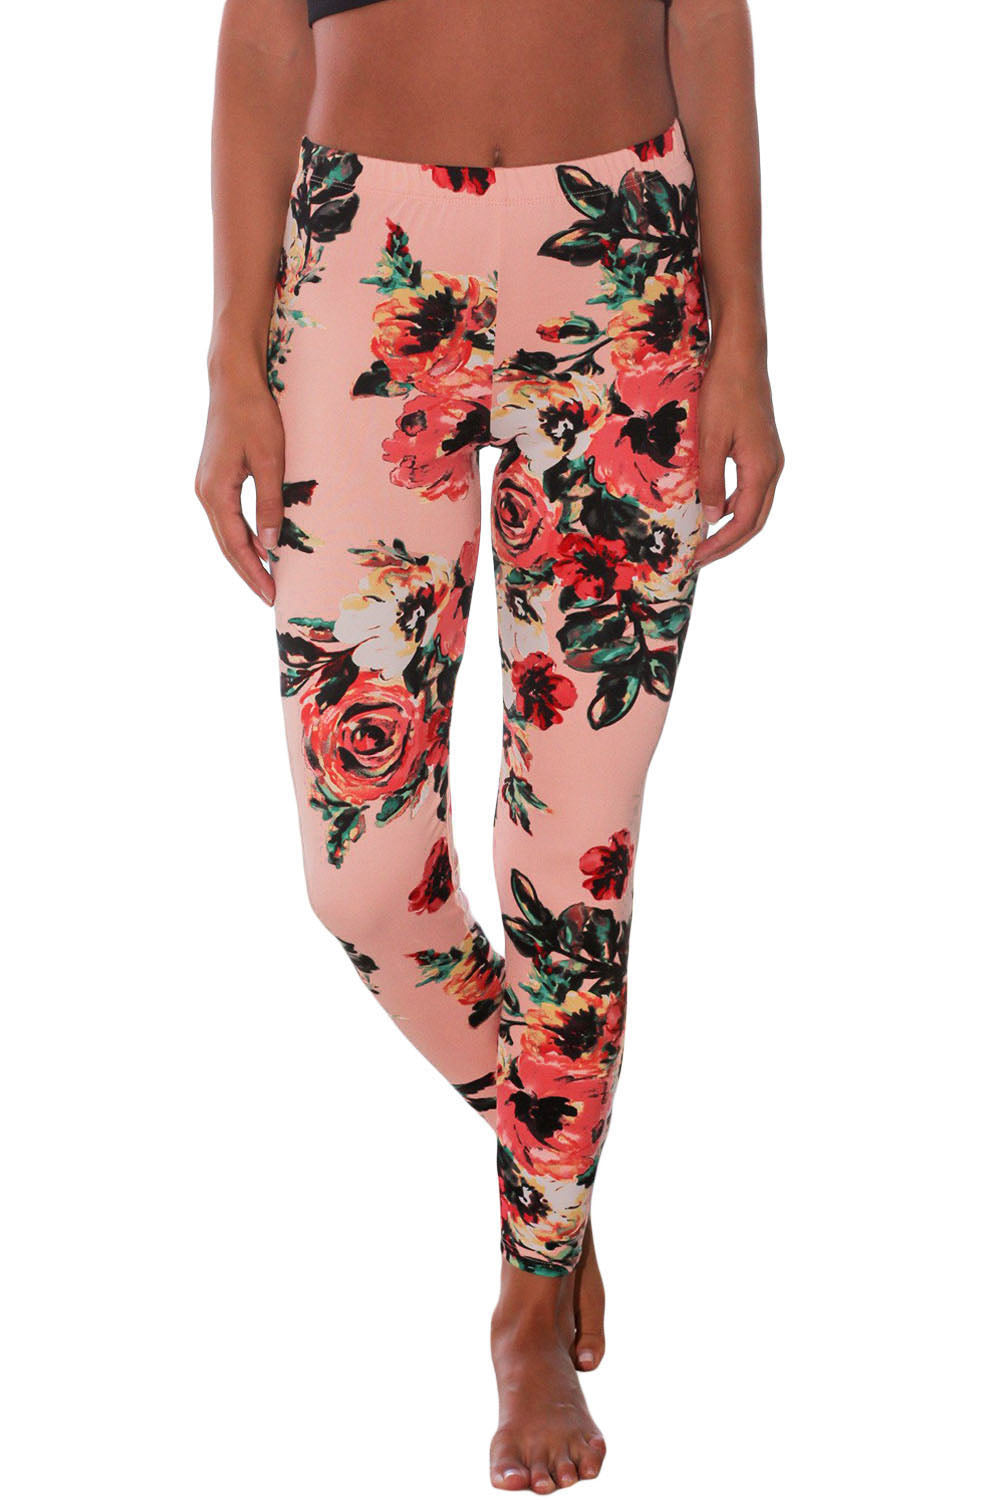 Sexy Blush Floral Stretchy Leggings – SEXY AFFORDABLE CLOTHING